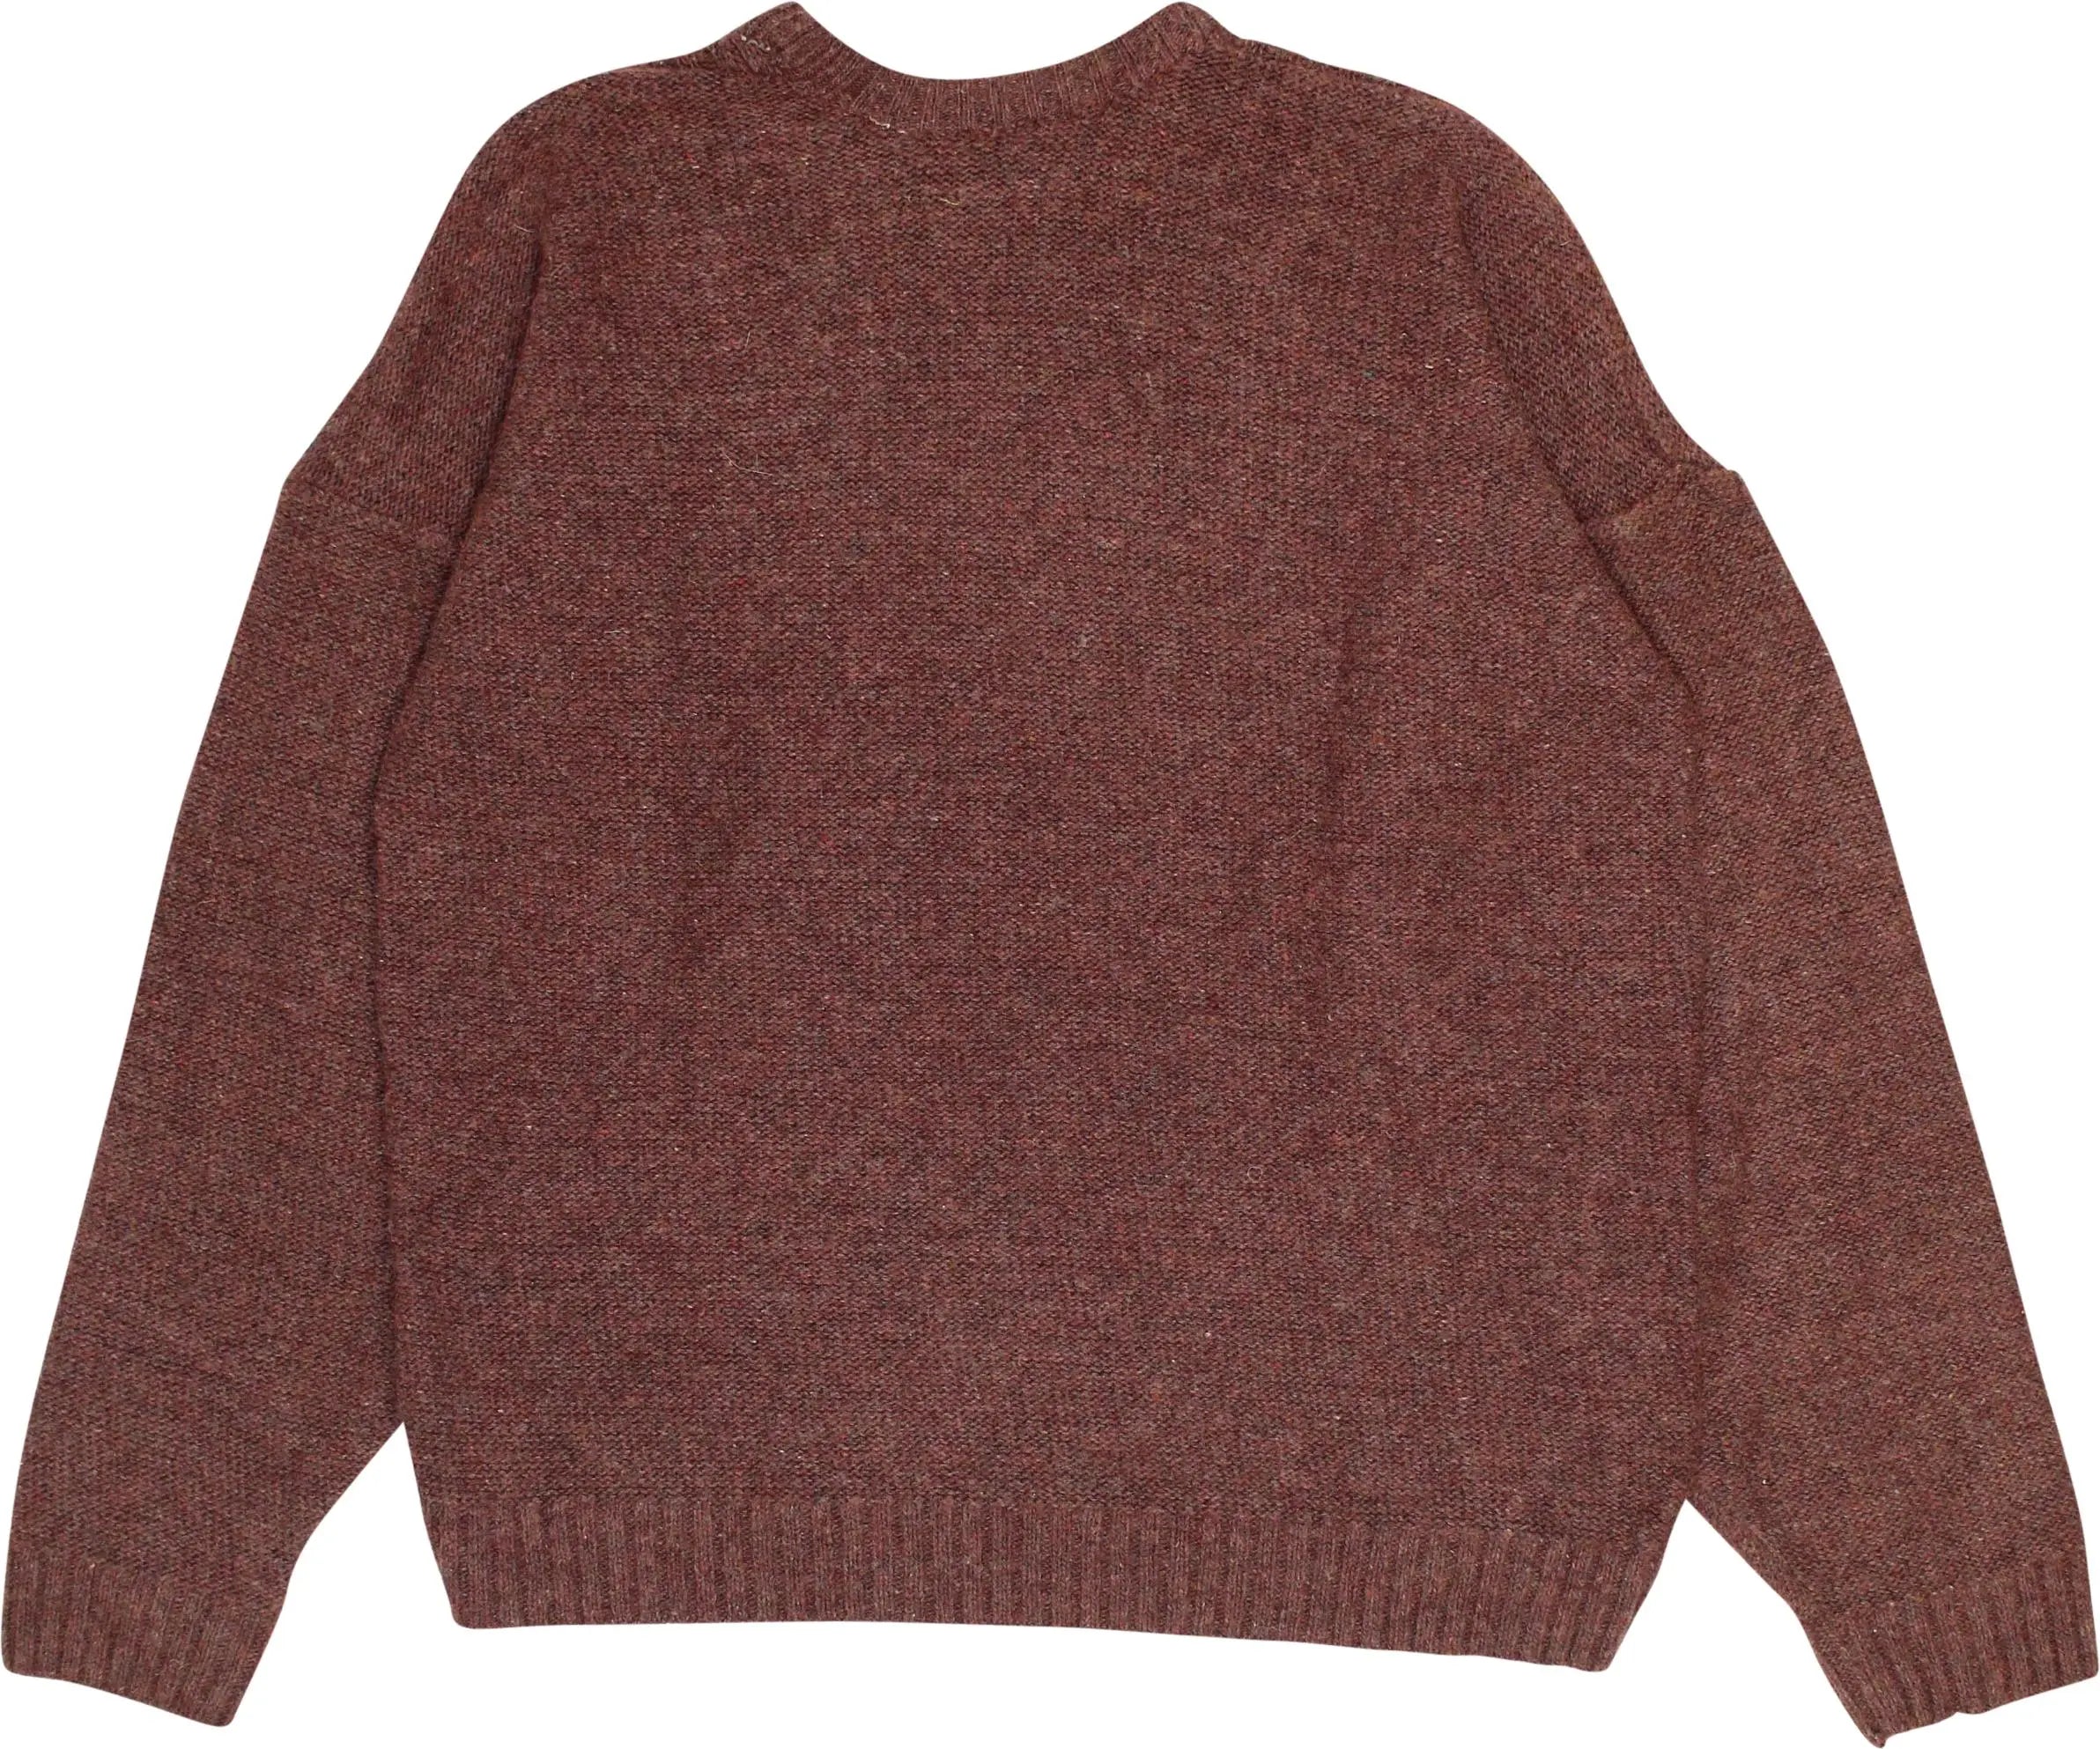 Unknown - Shetland Knitted Jumper- ThriftTale.com - Vintage and second handclothing